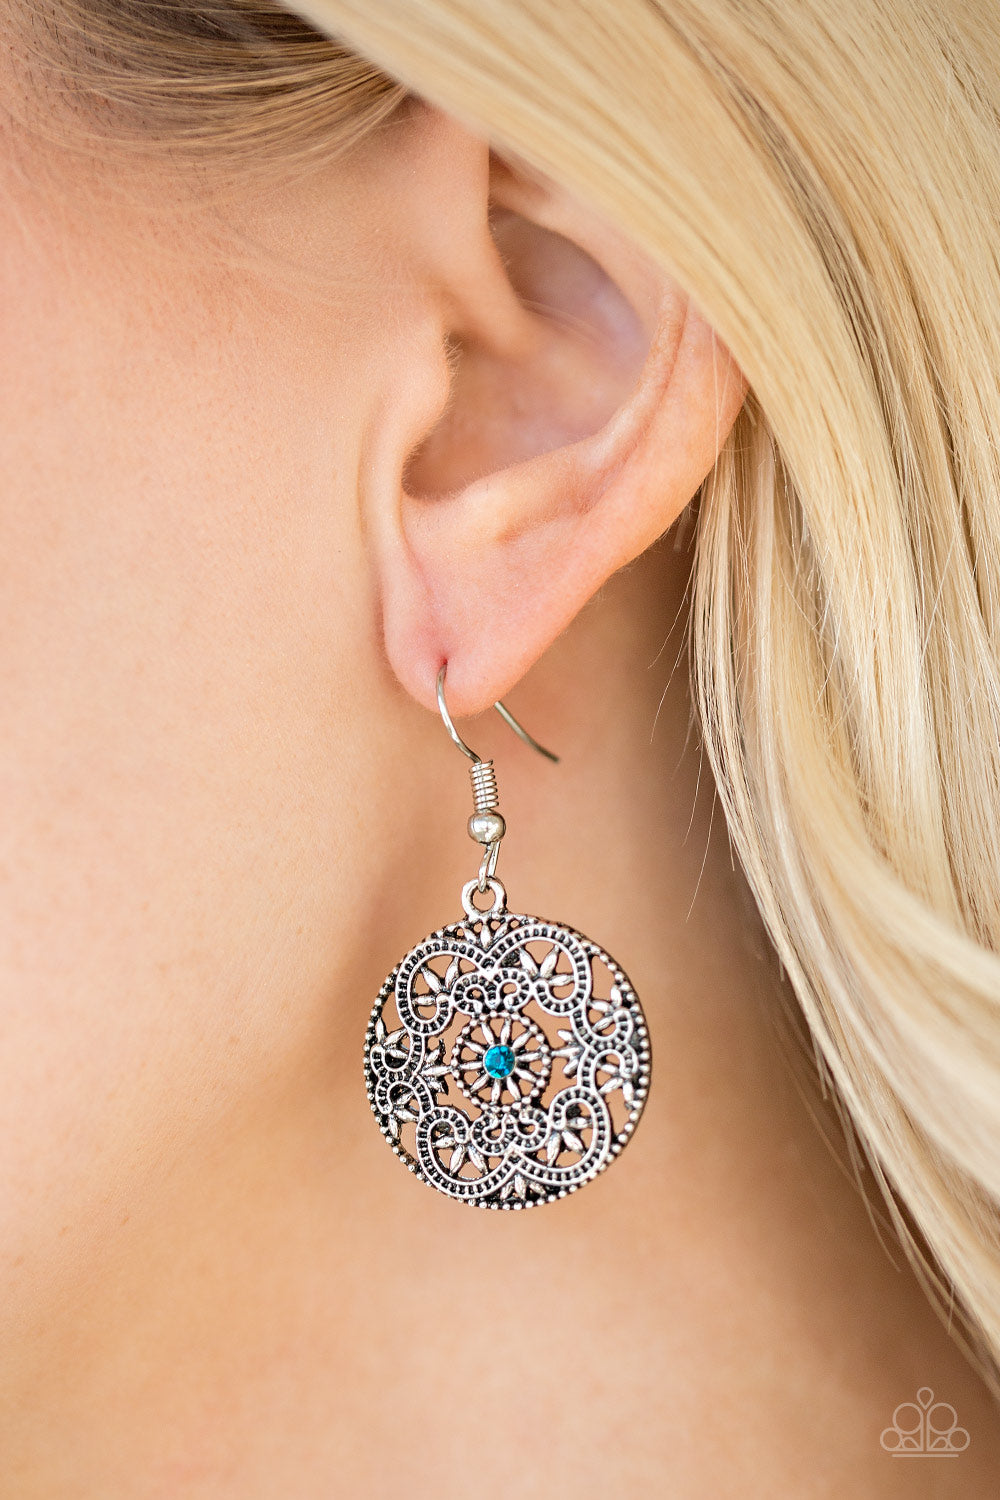 Paparazzi Rochester Royale - Blue Earrings. Get Free Shipping! #P5WH-BLXX-180XX